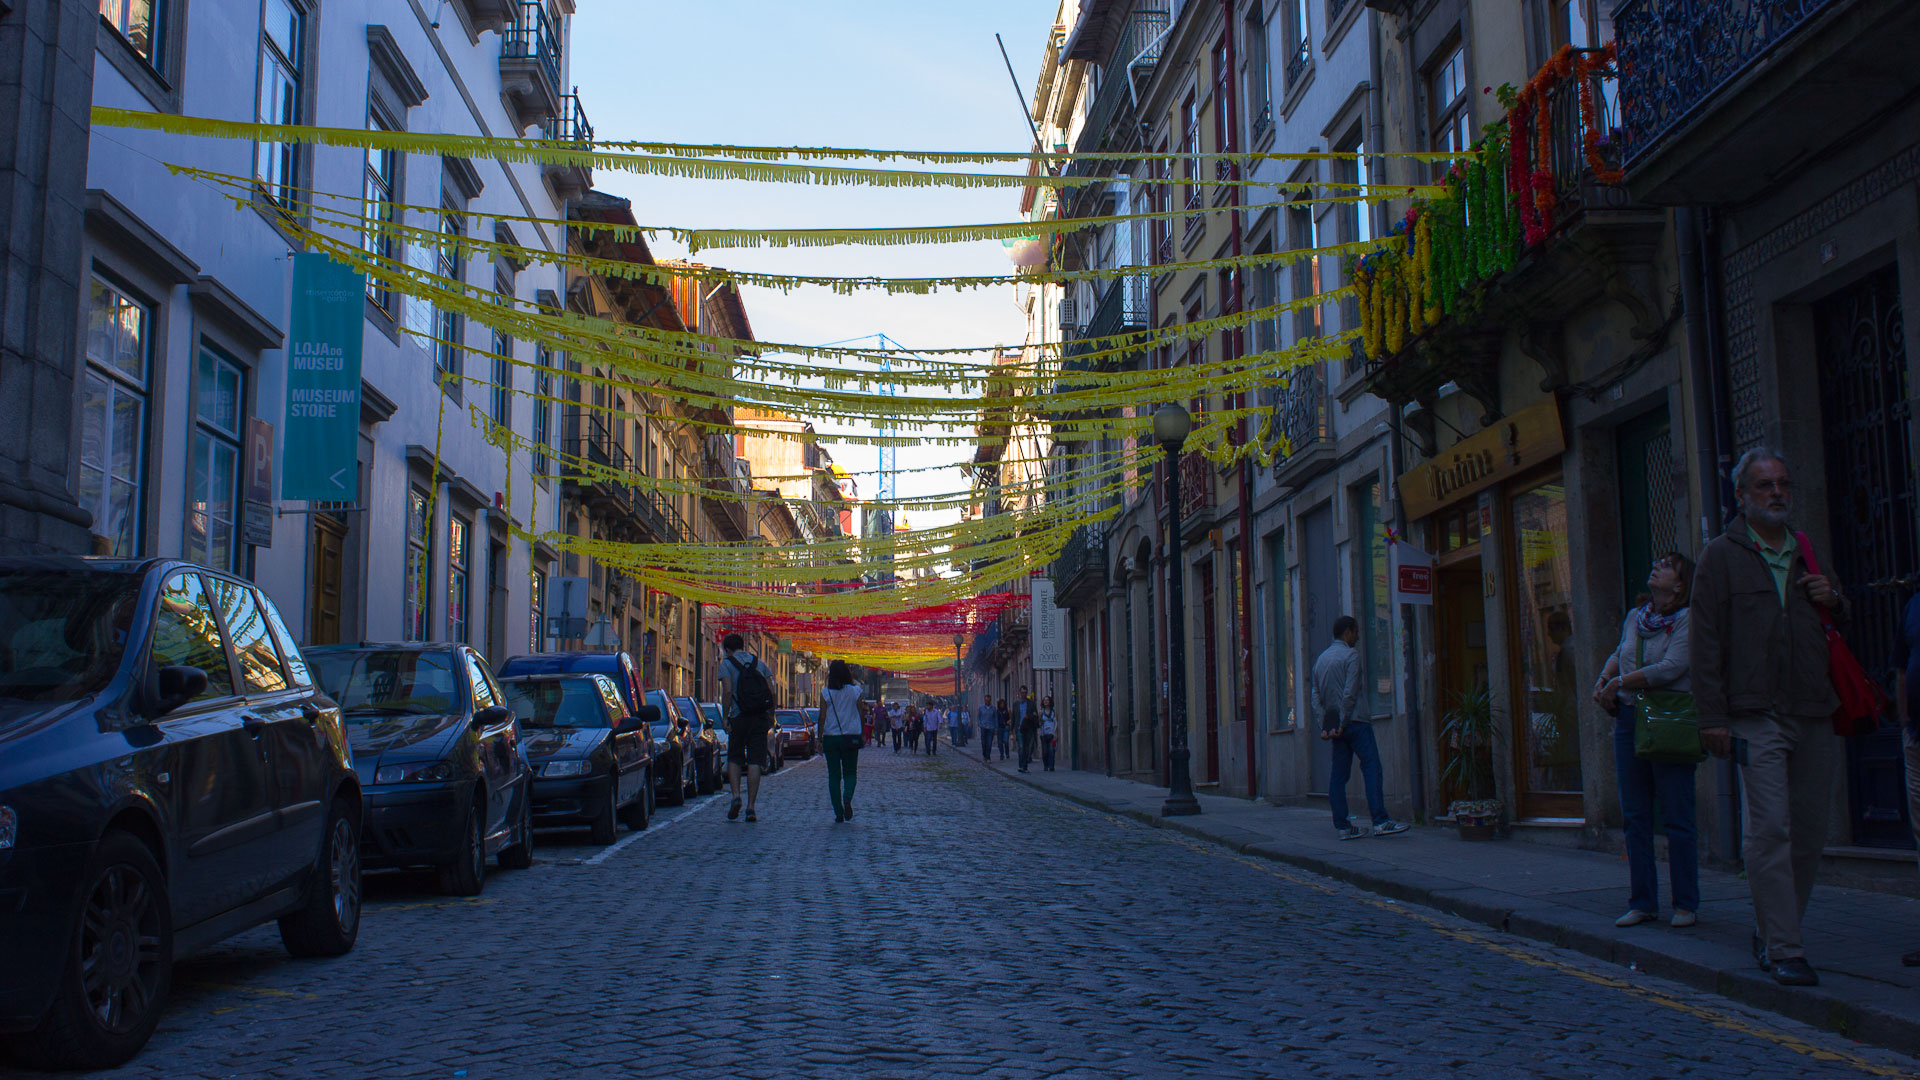 Getting ready for the St John’s Eve in Porto